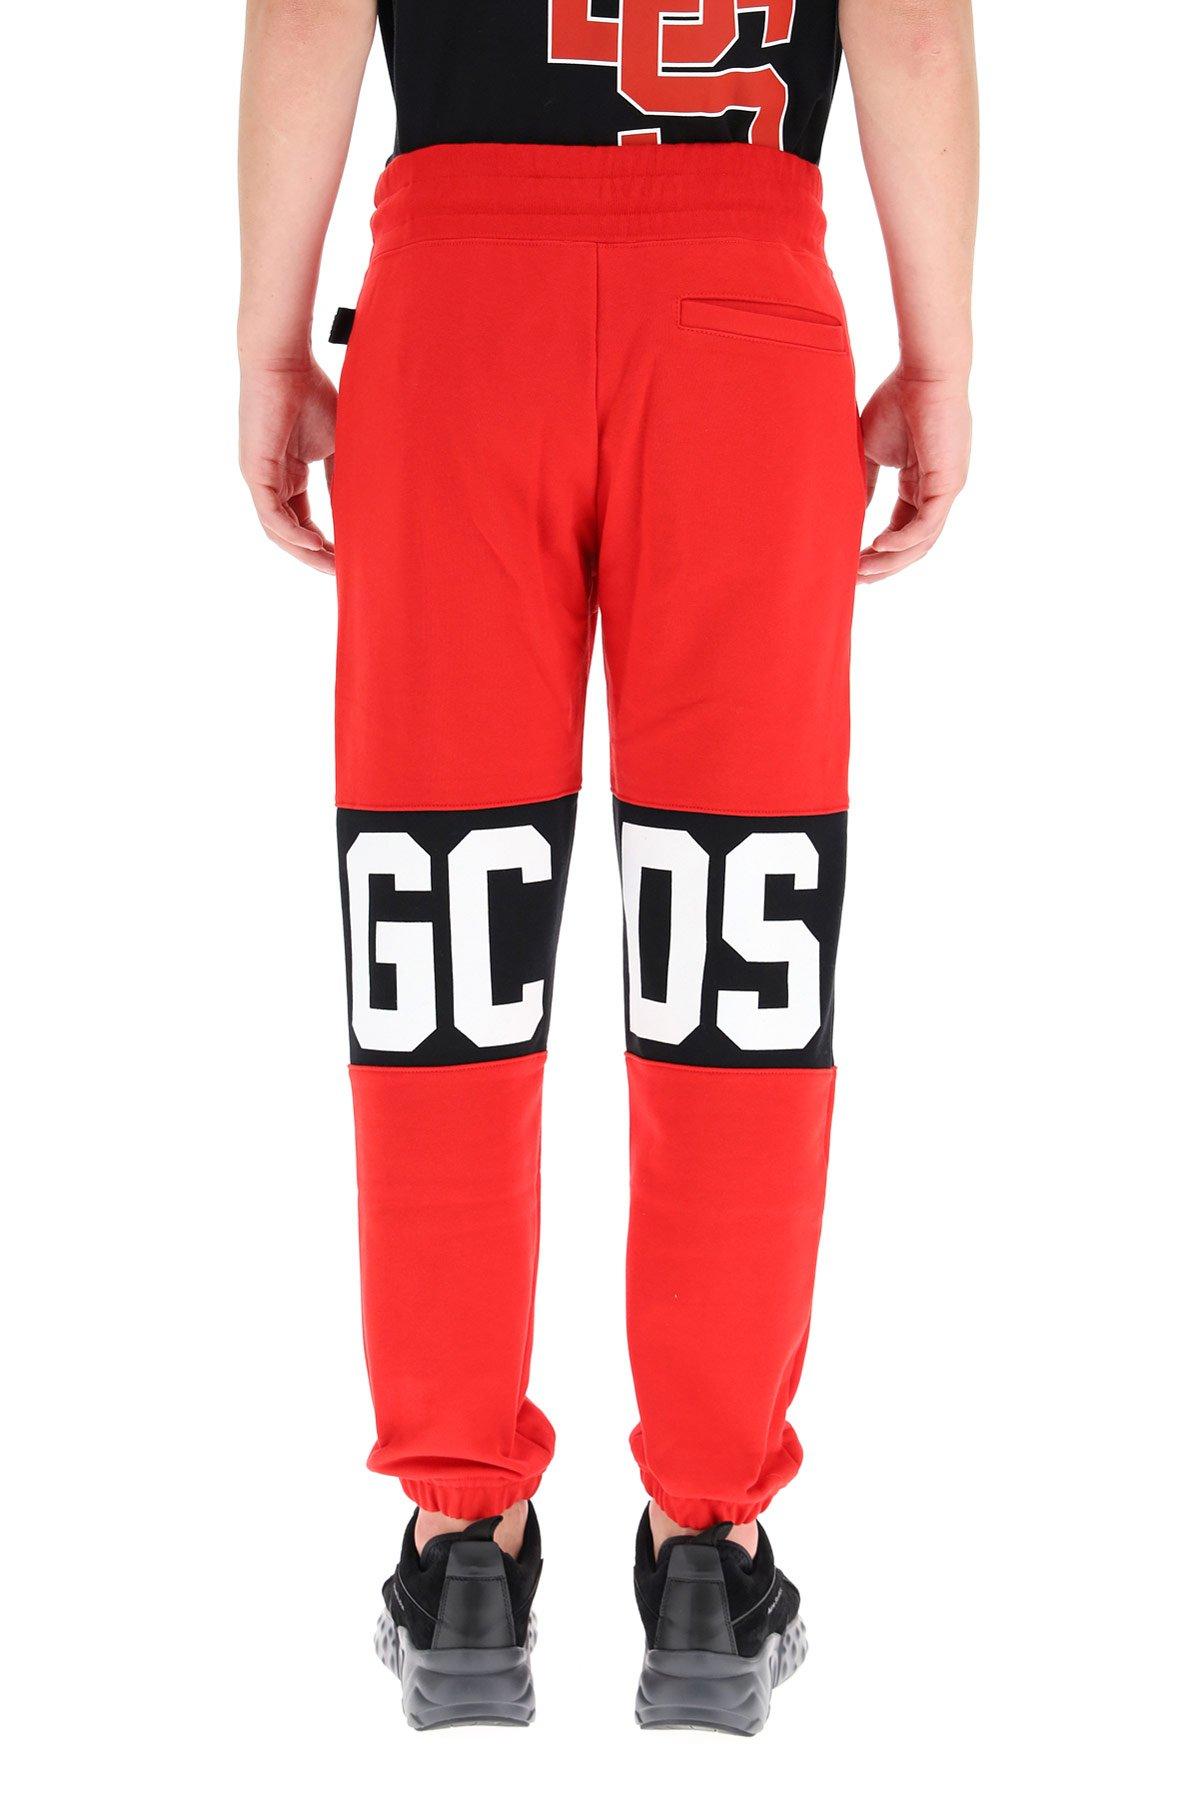 Gcds Cotton jogger Pants With Logo in Red for Men - Lyst